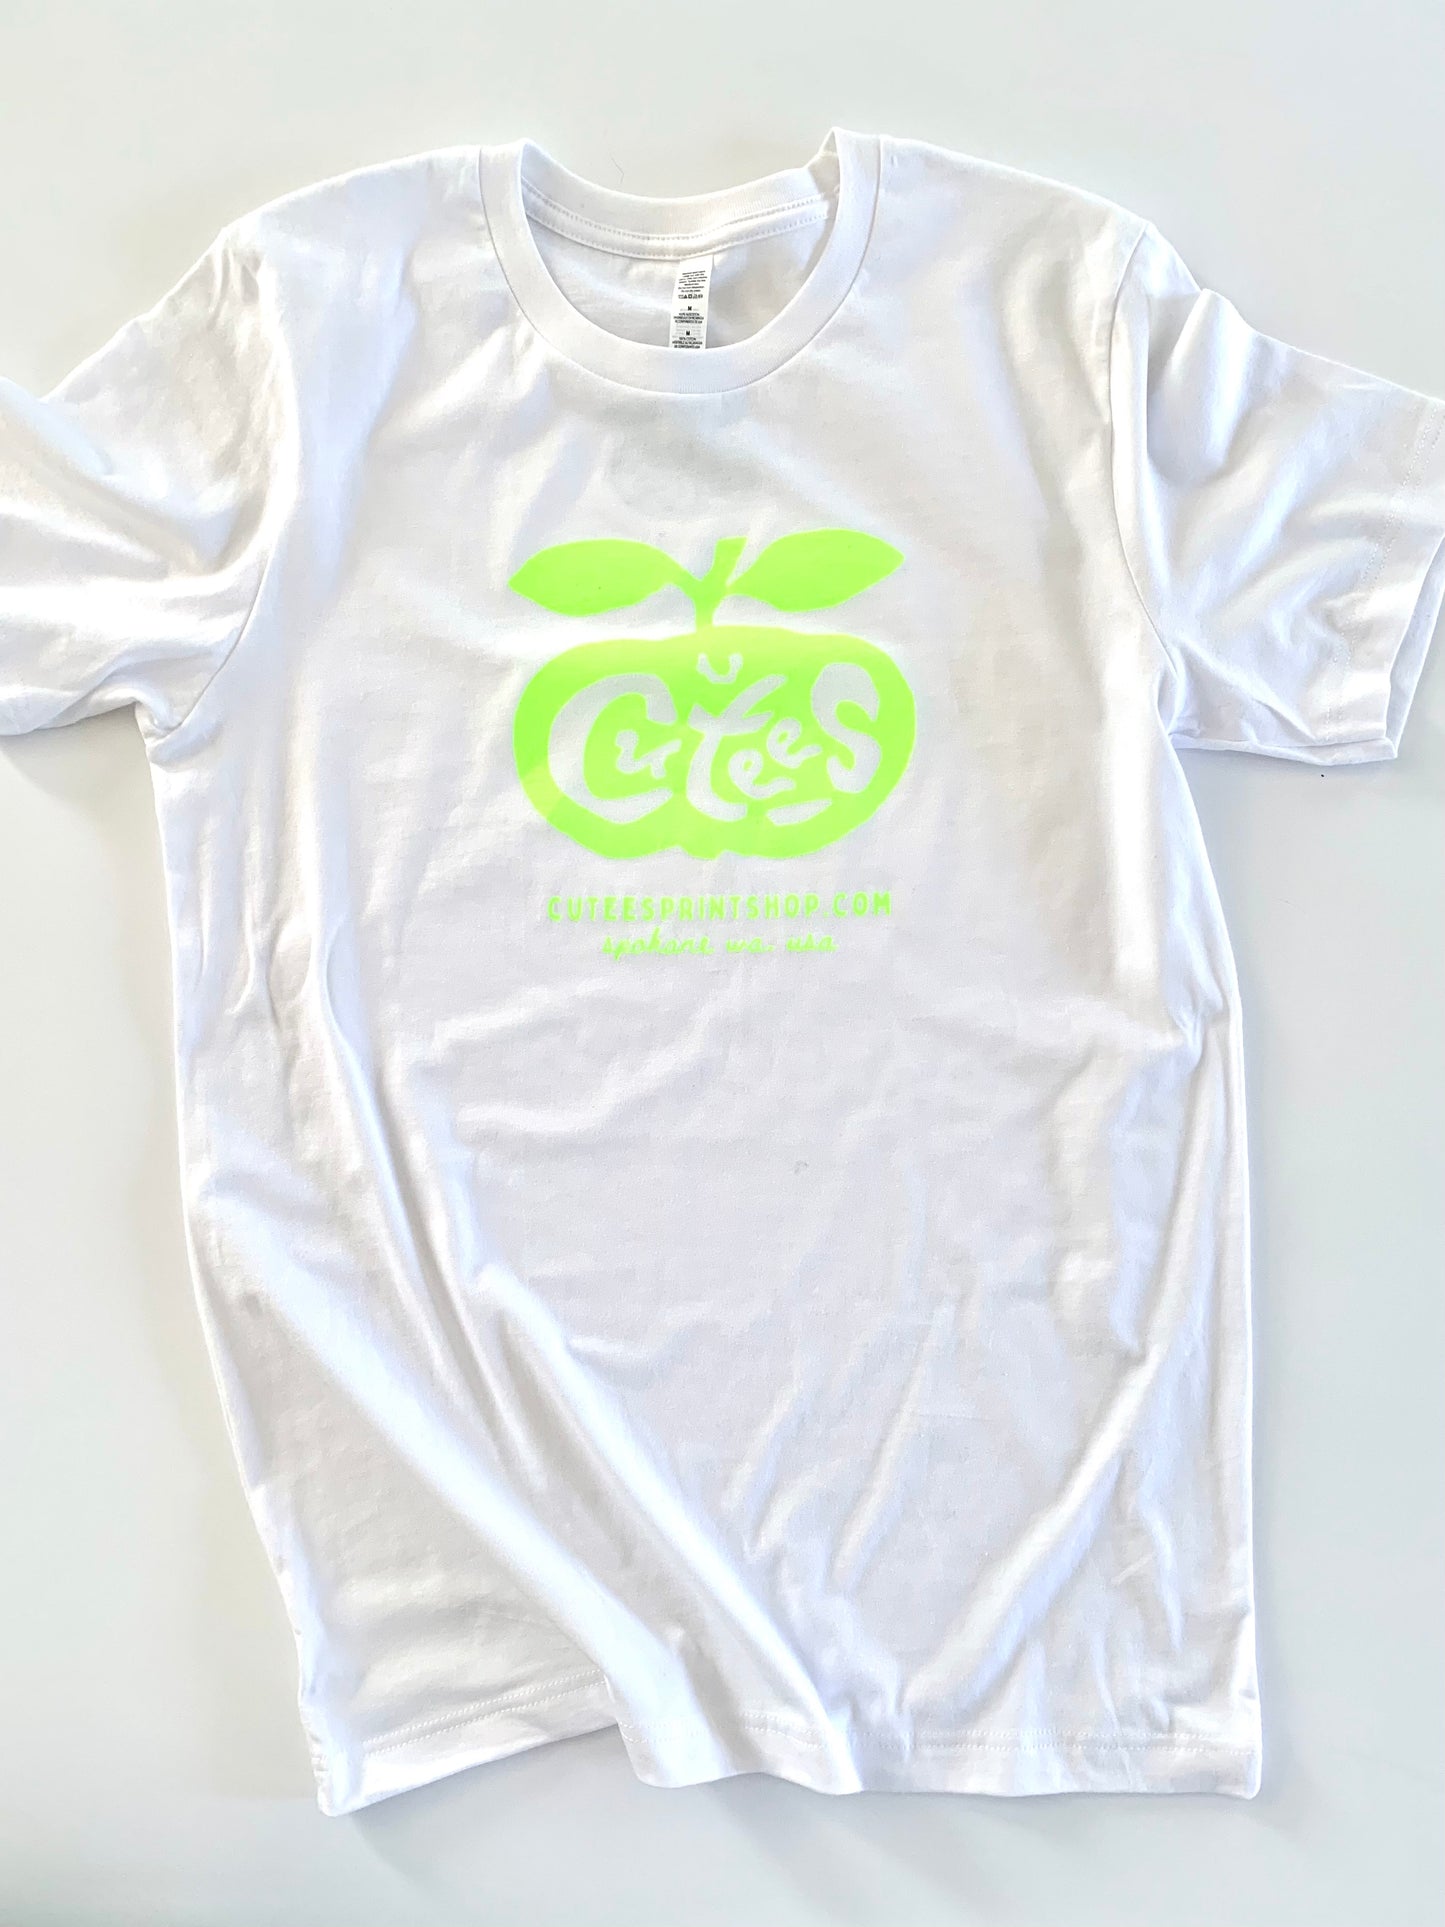 Cutees Original Logo Tee in White-Neon, Classic Fit